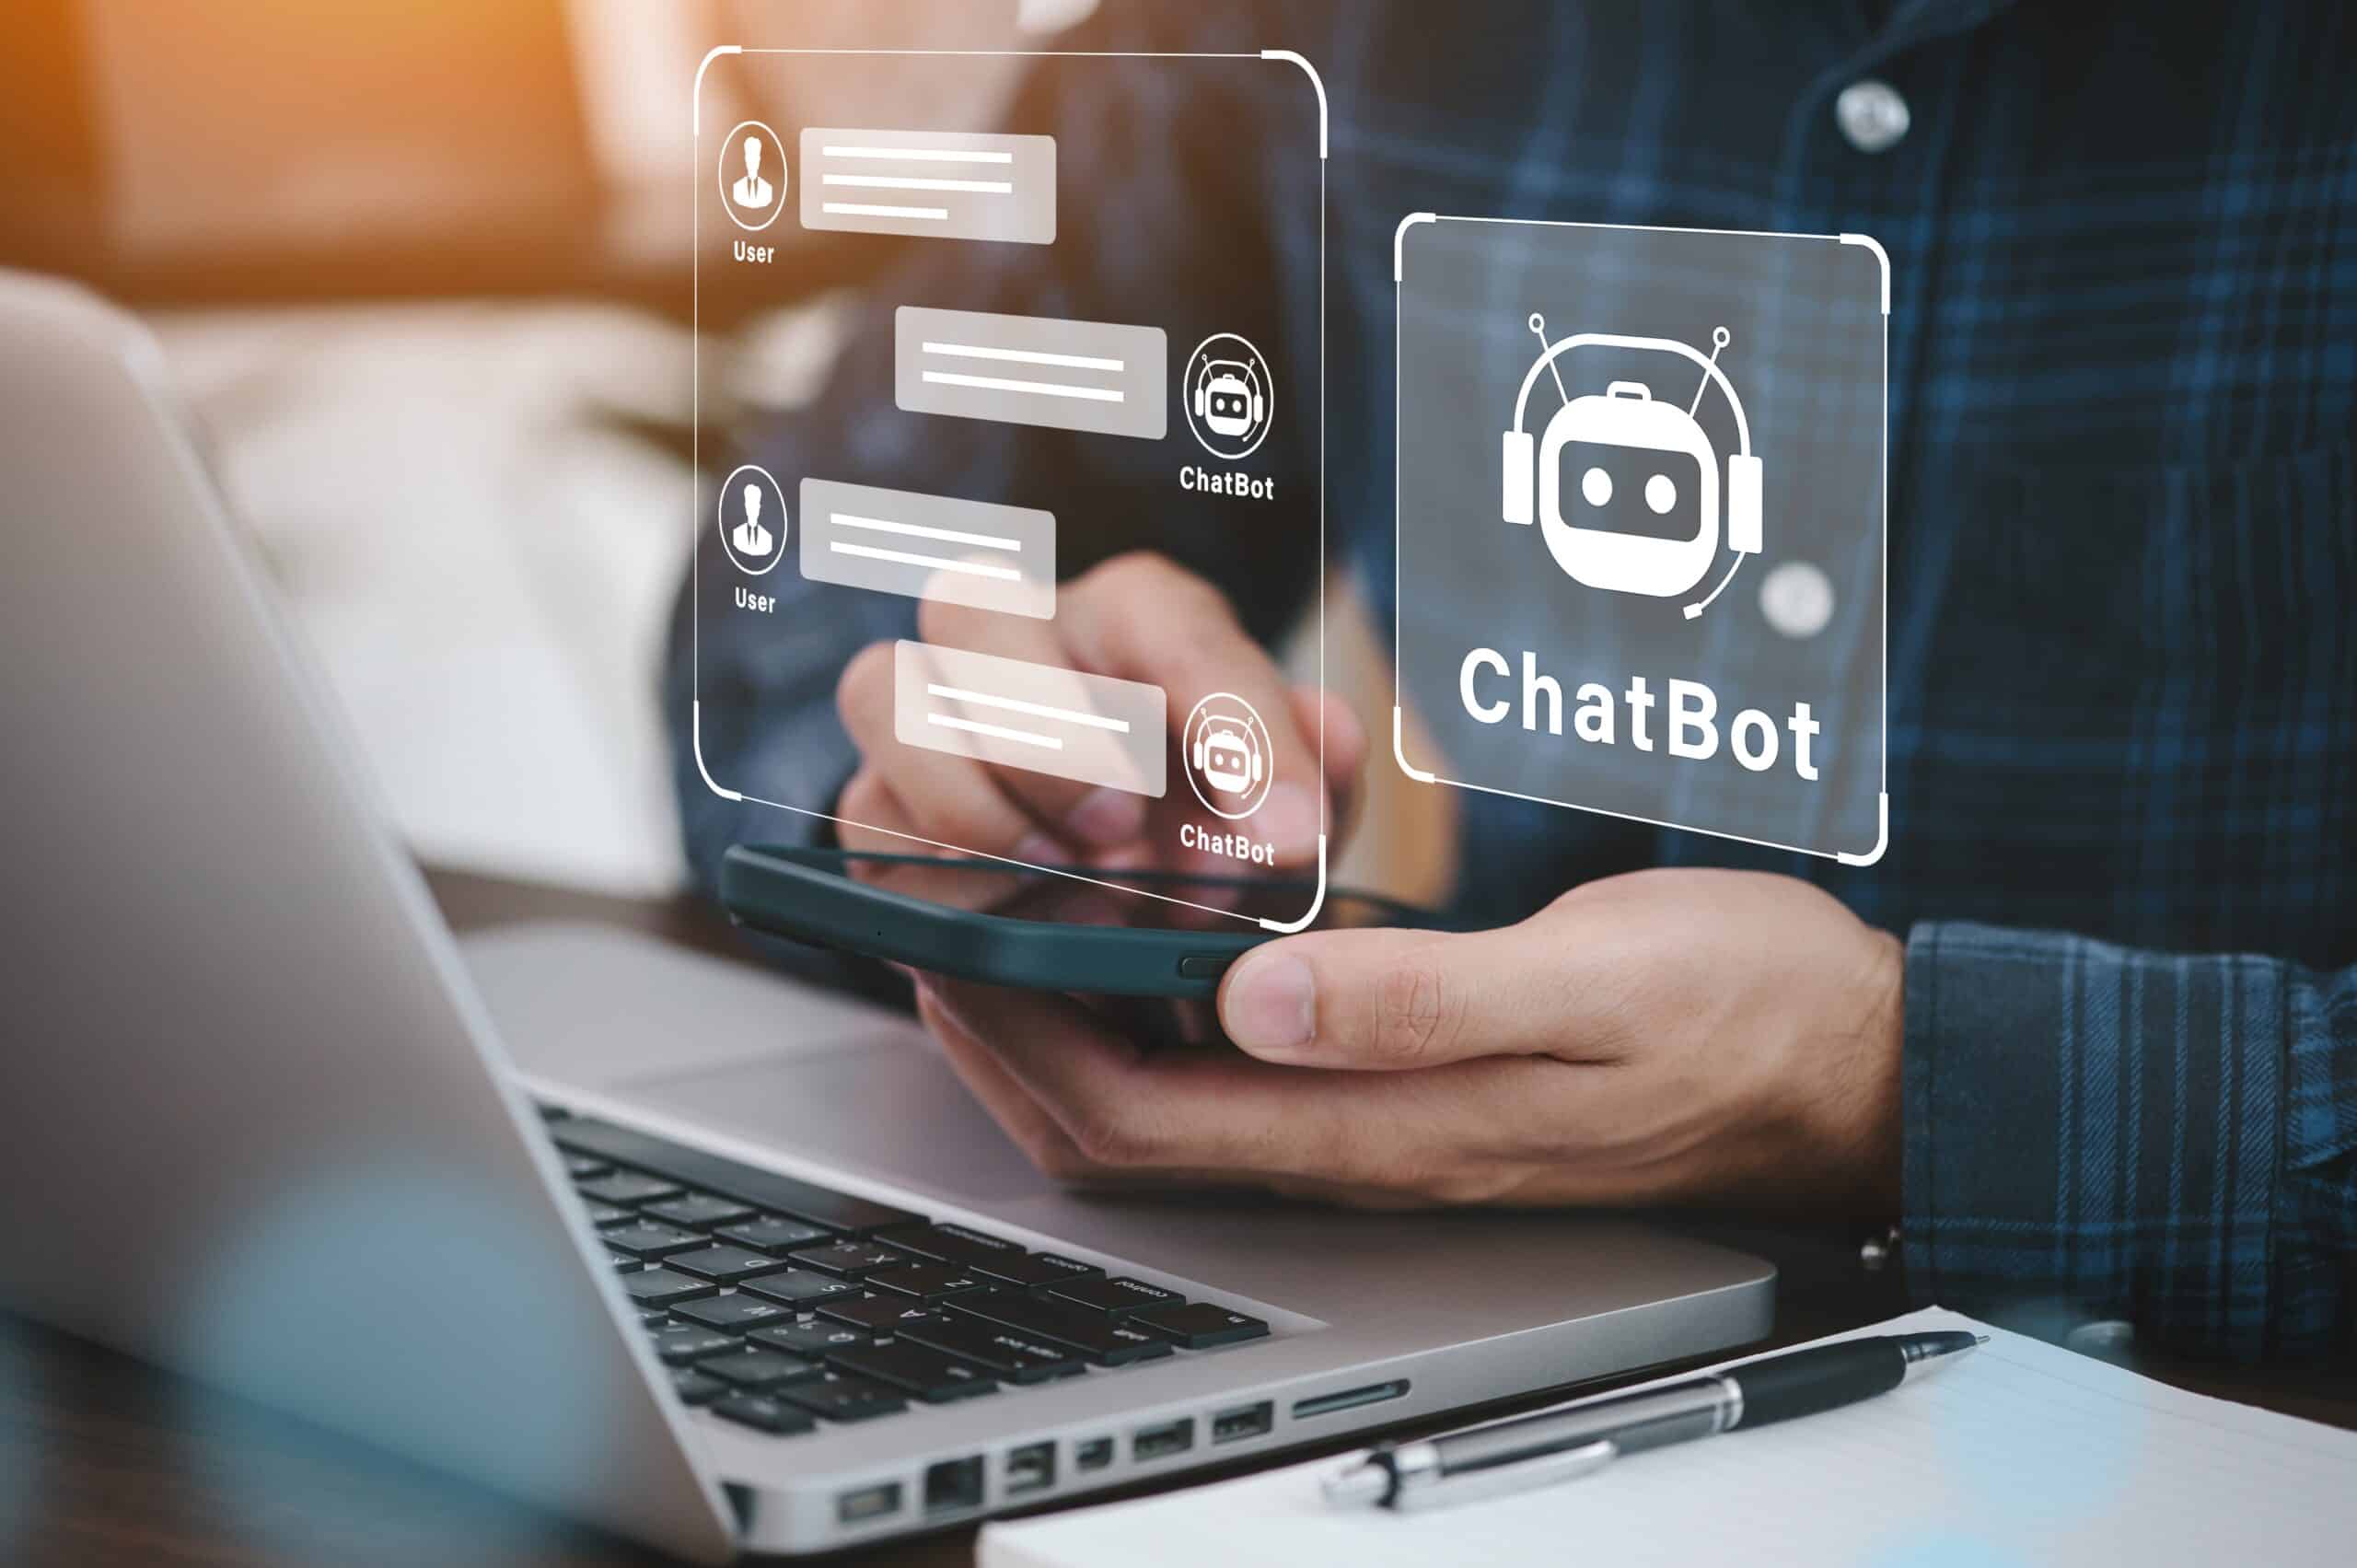 Using,System,Ai,Chatbot,In,Computer,Or,Mobile,Application,To